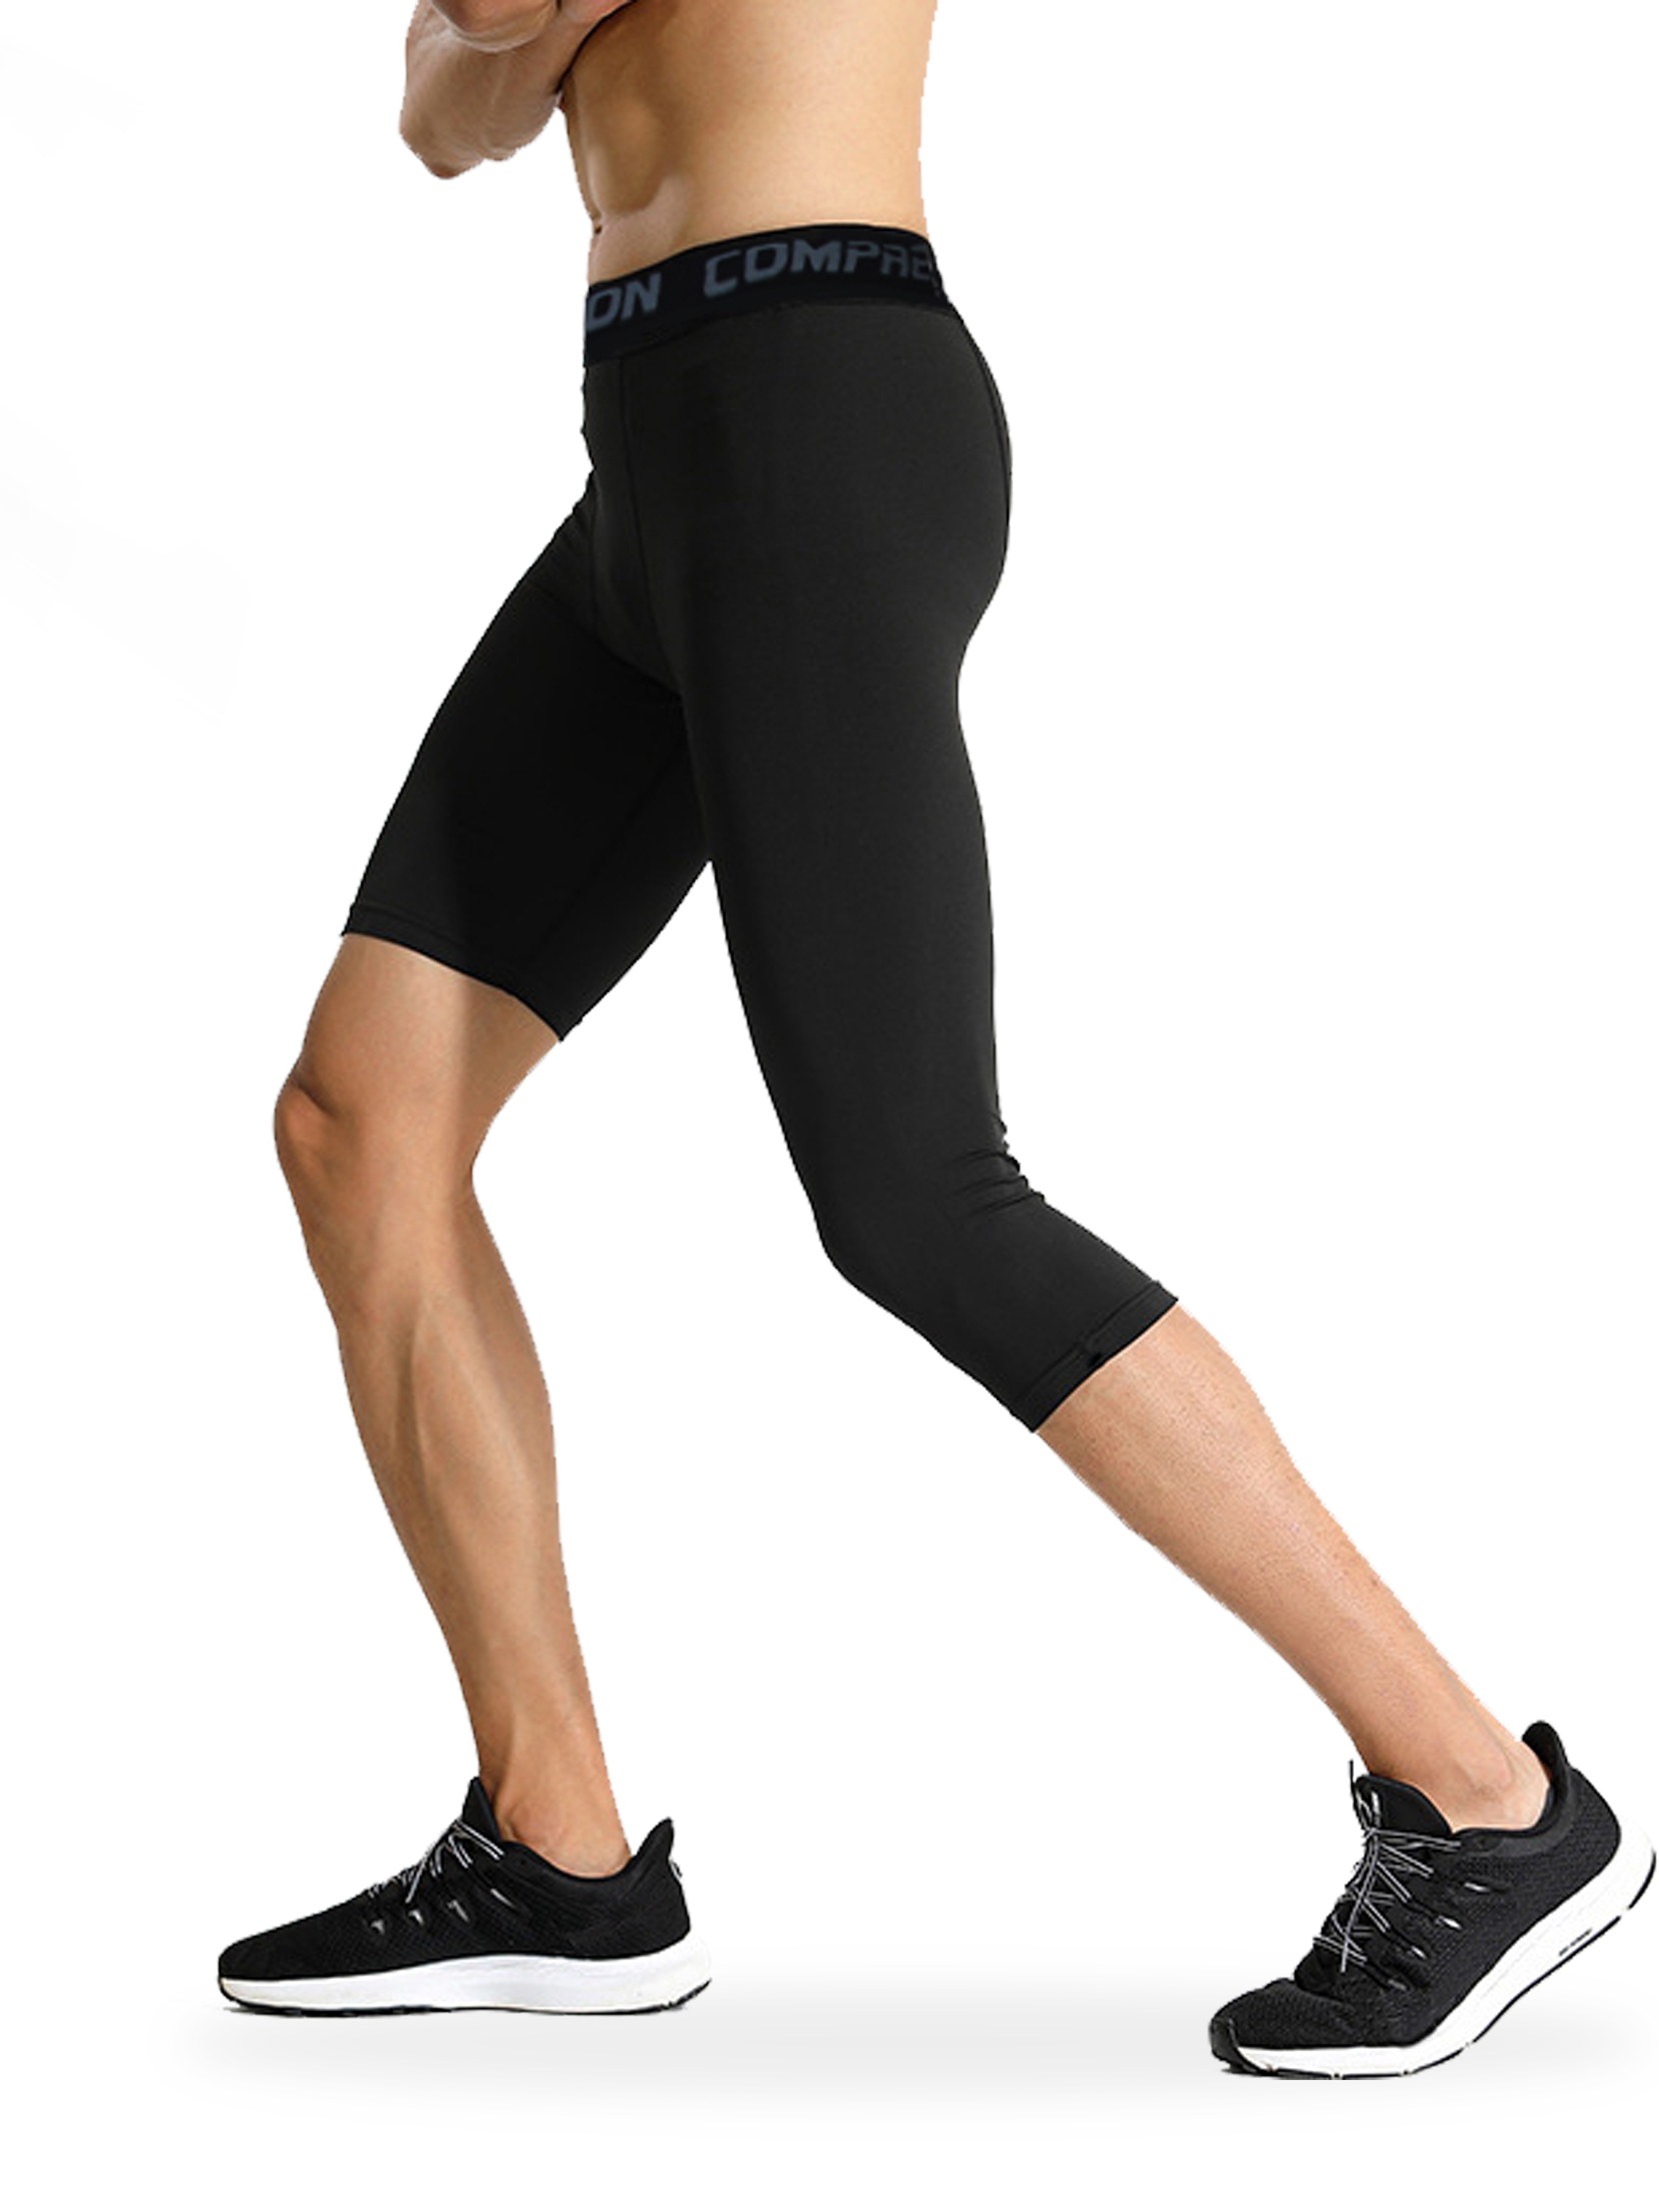 Men Base Layer Exercise Trousers Compression Running Football Leg